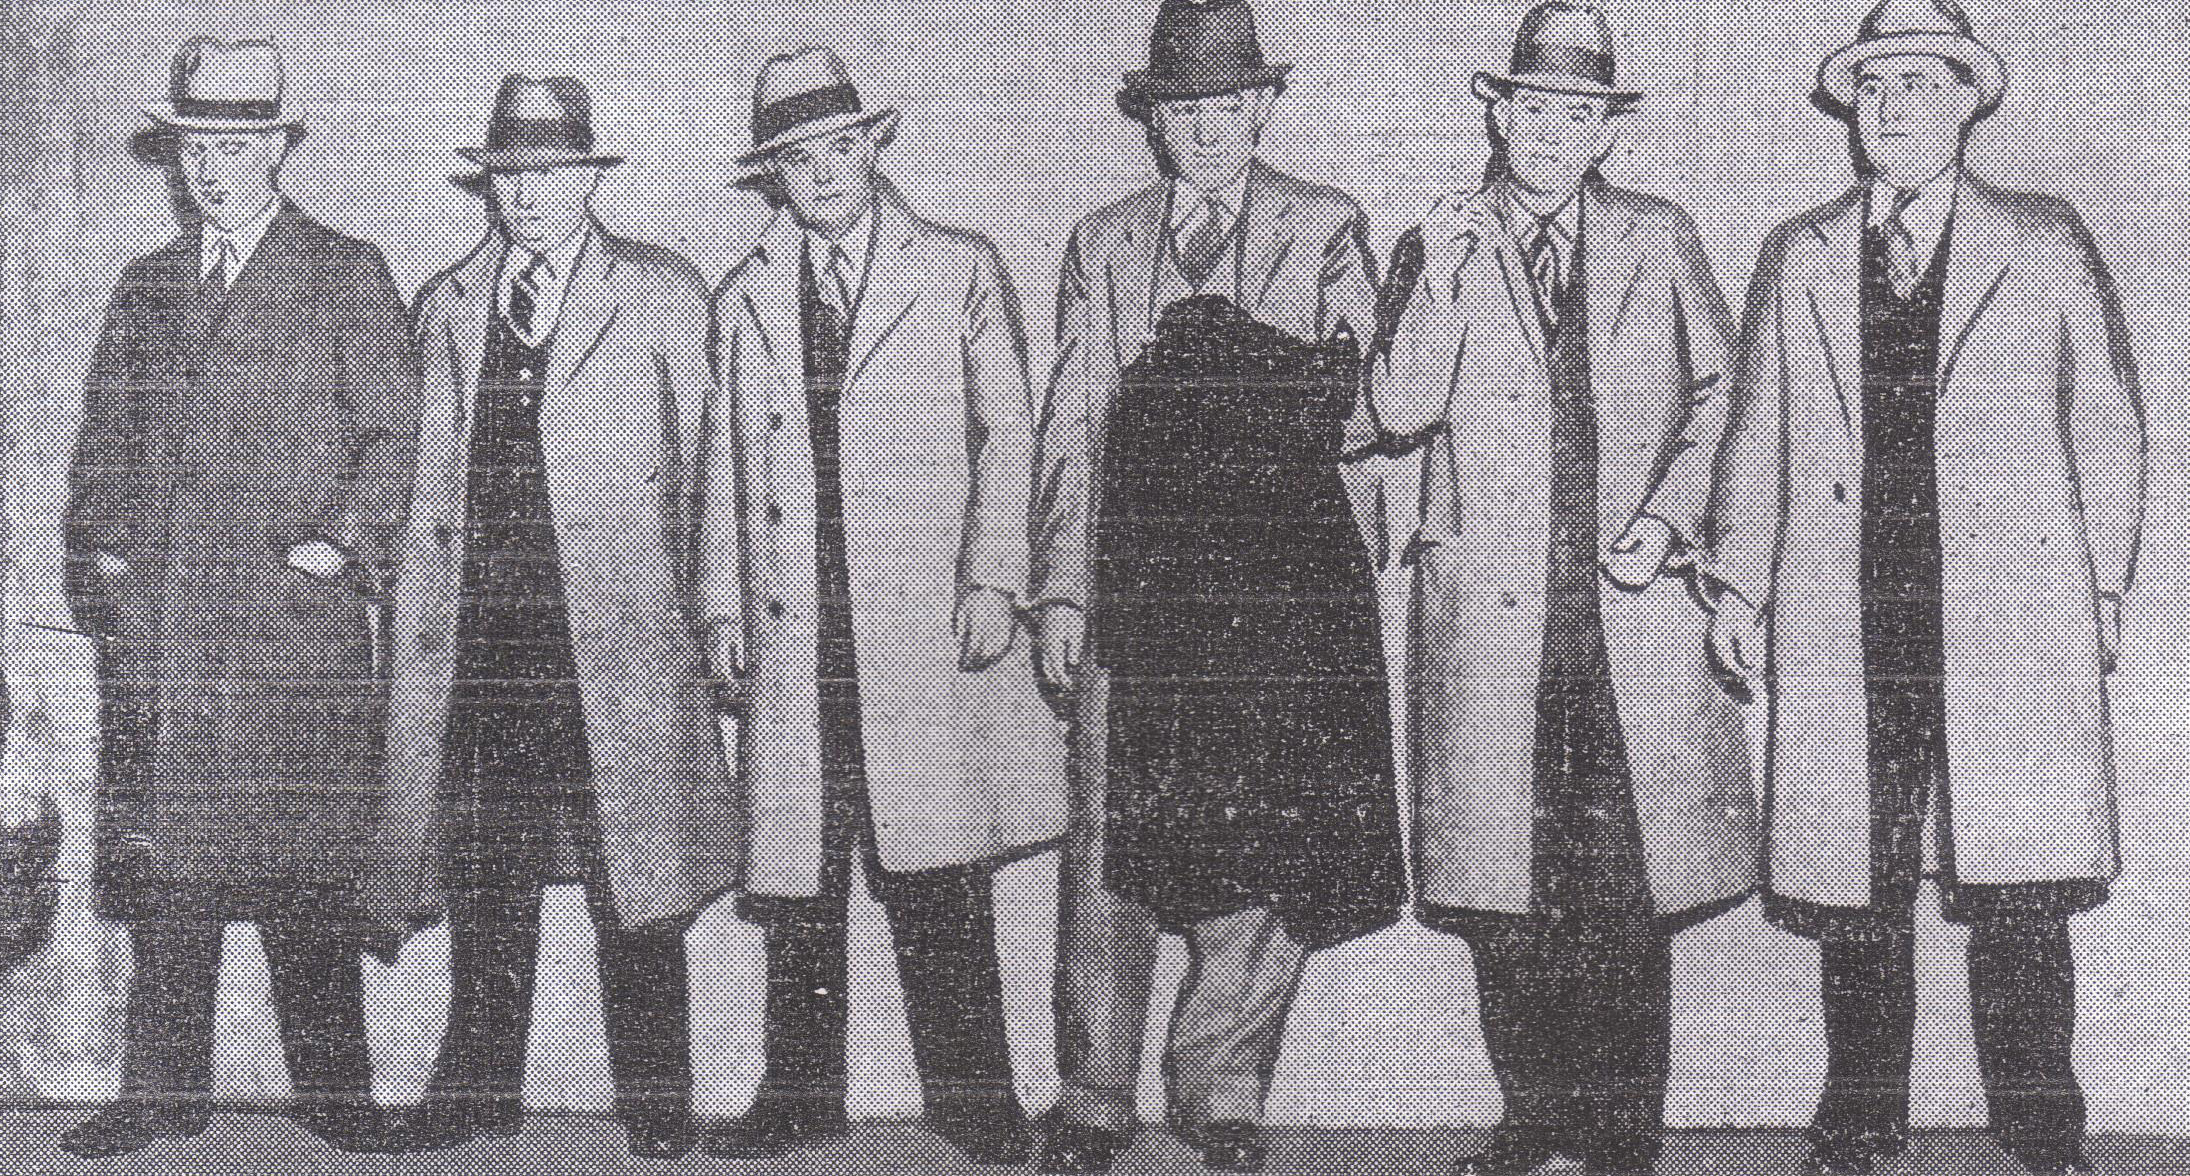 Six random gangsters who were rounded up to stand trial for the bank robbery.  None had any involvement.